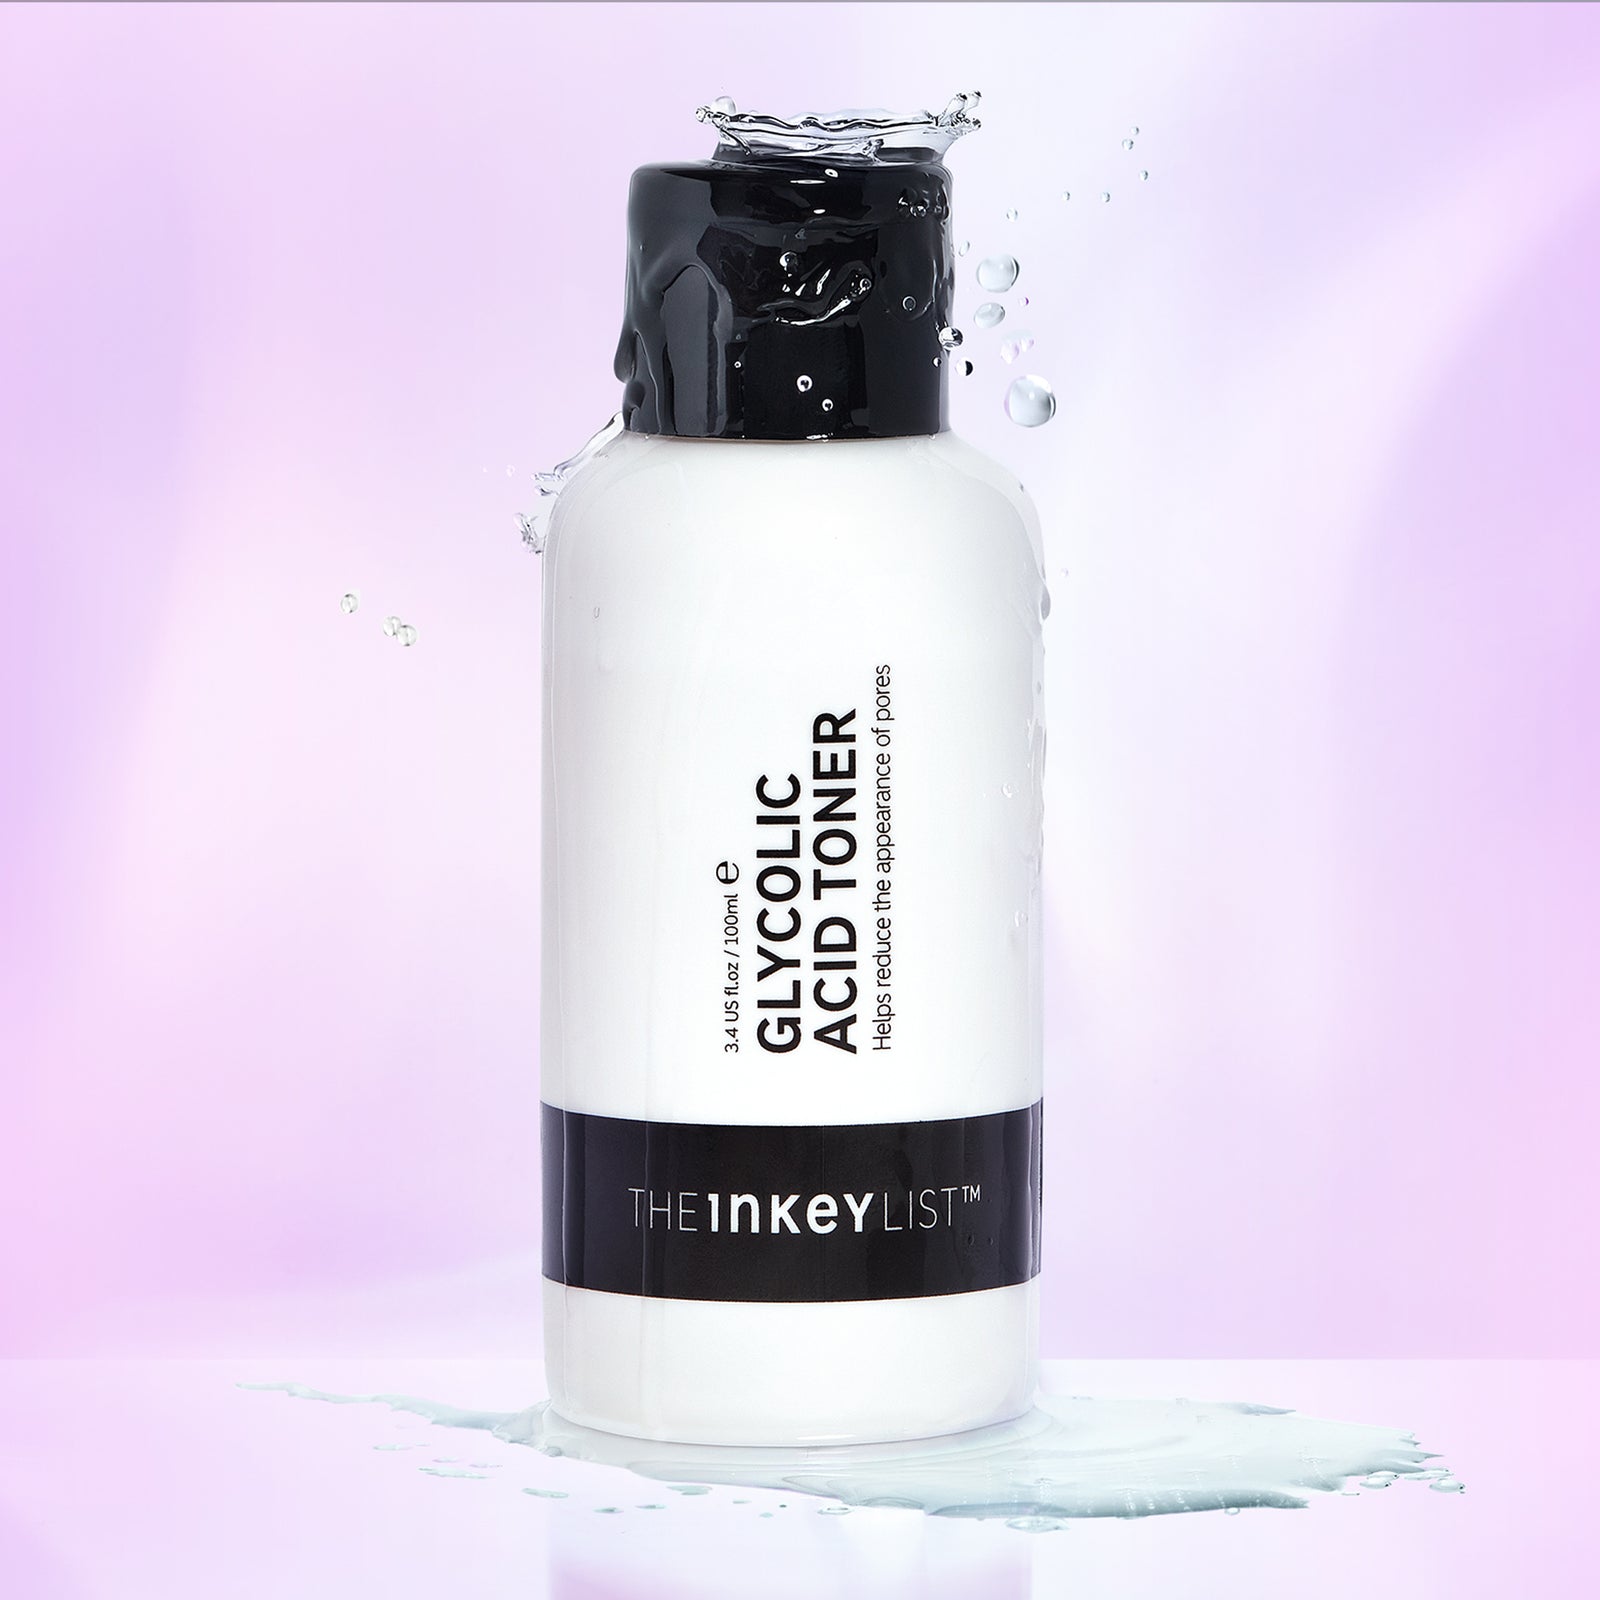 Glycolic Acid Toner product against a purple background with toner dripping down the bottle